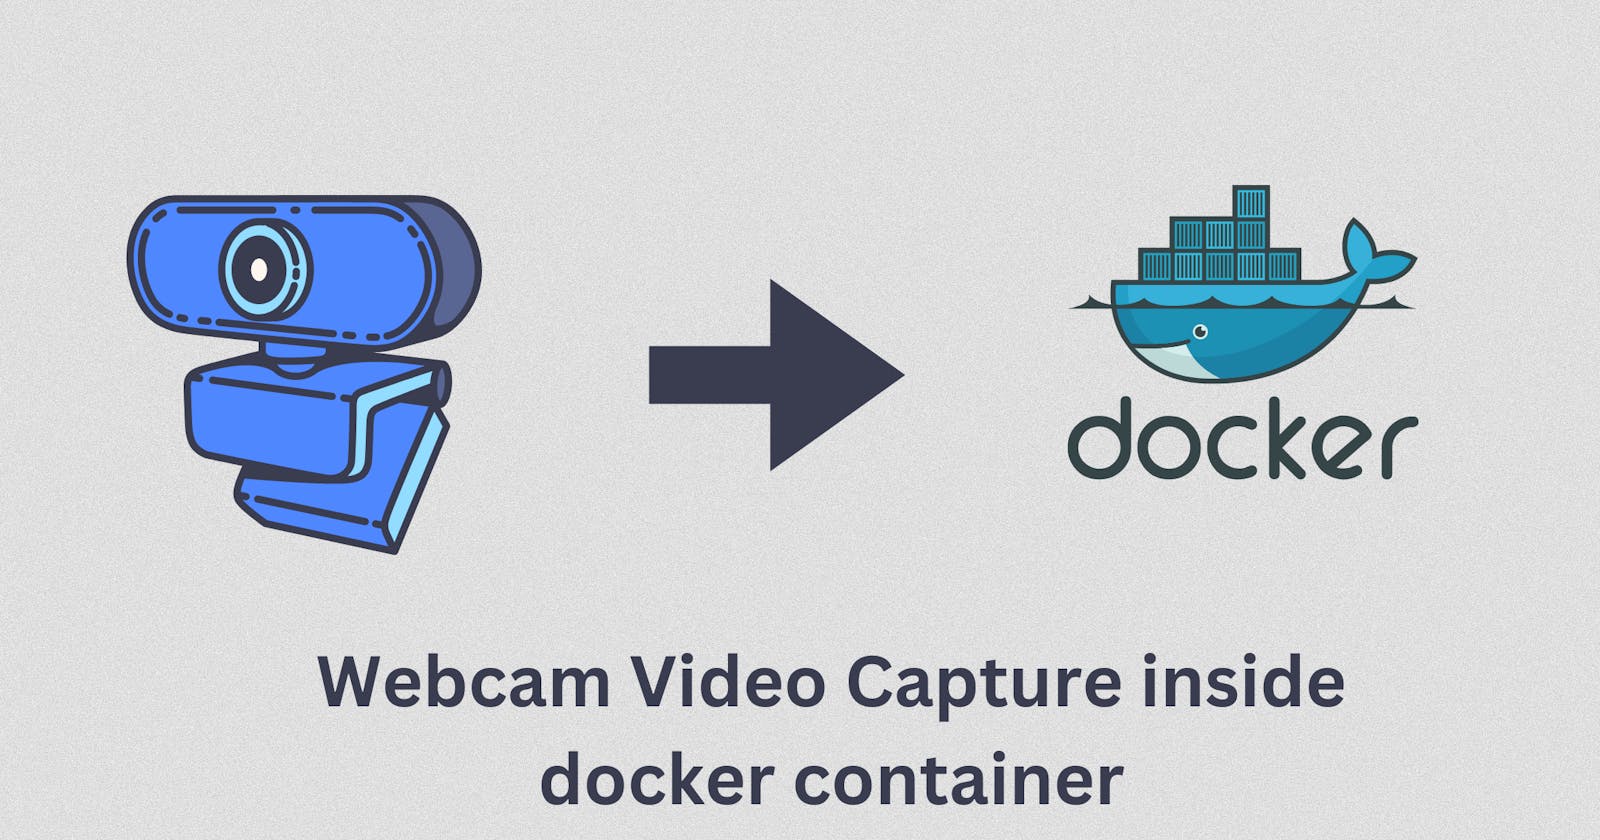 Enabling Video Capturing from Webcam Inside a Docker Container